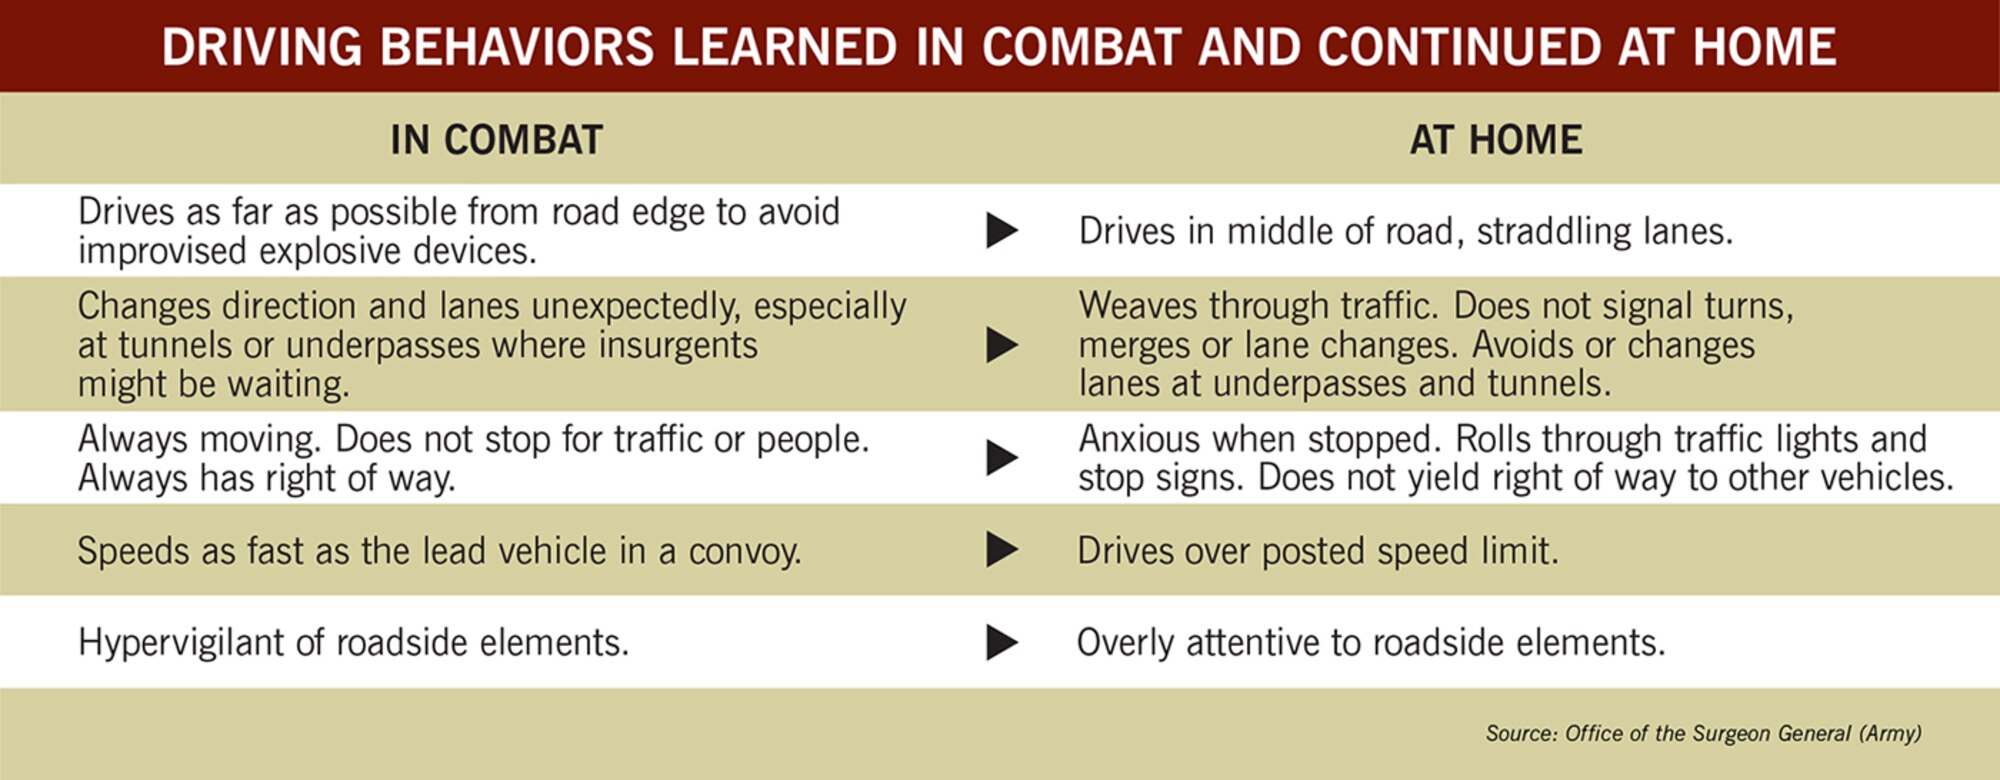 Driving behaviors learned in combat and continued at home. Source: Office of the Surgeon General (U.S. Army). 